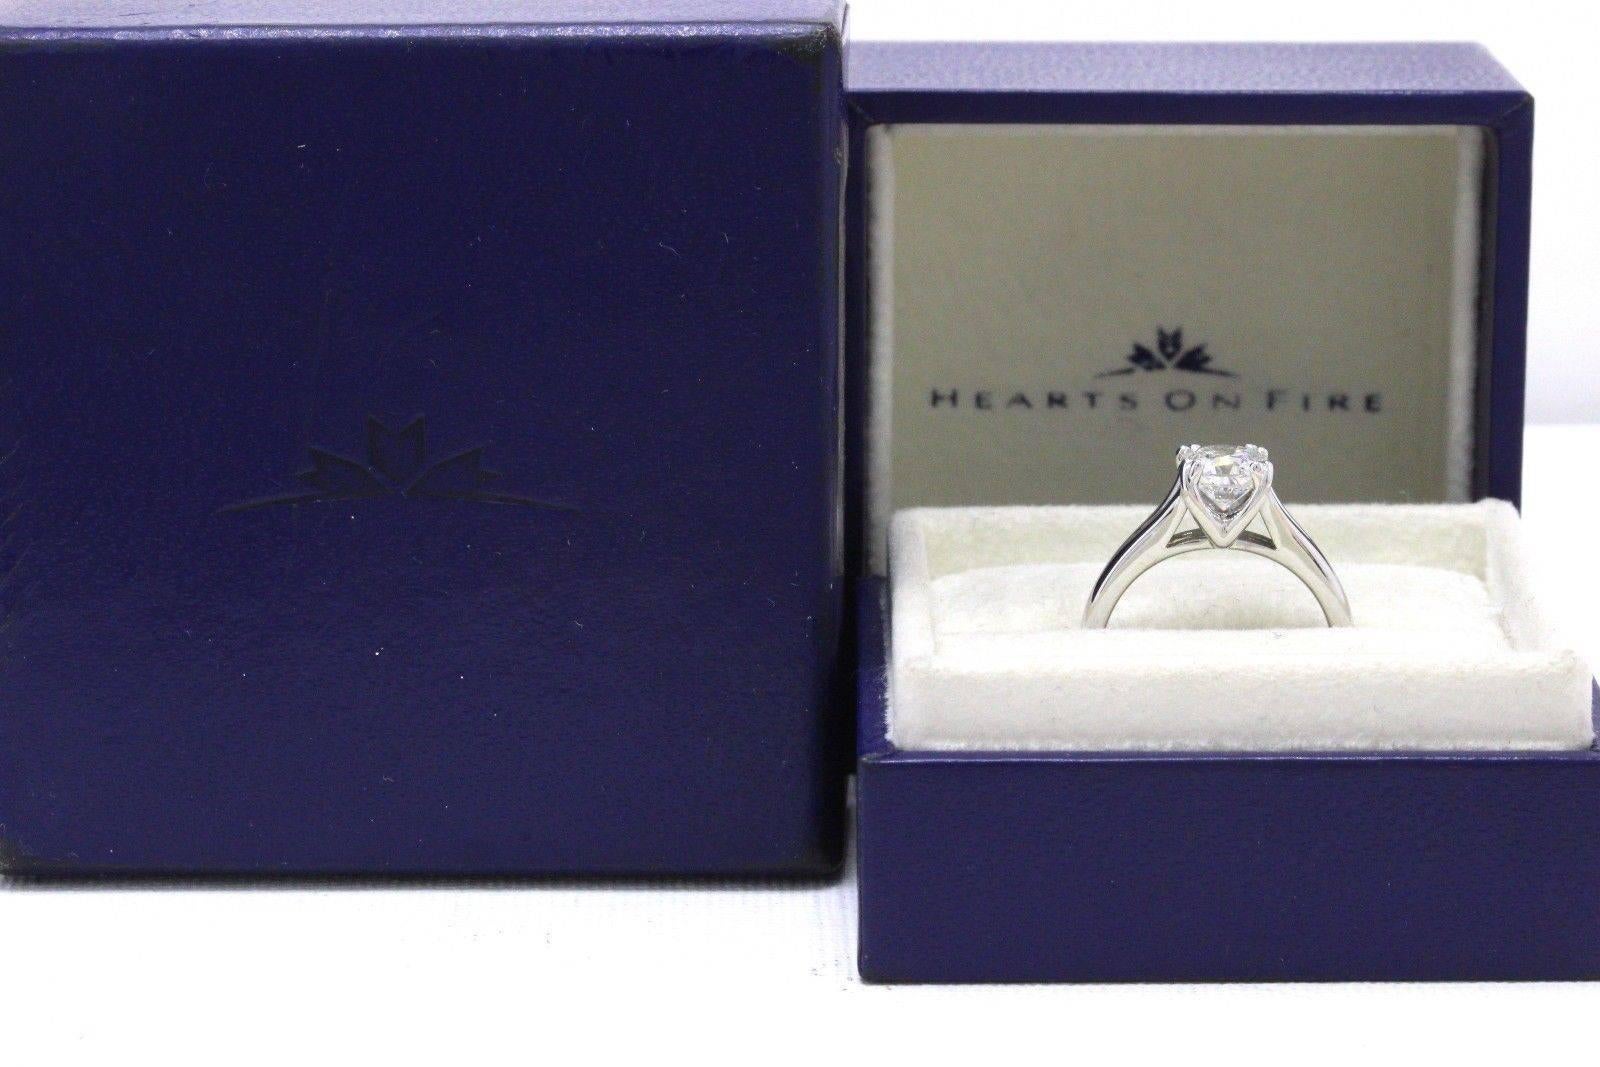 HEARTS ON FIRE DREAM CUT DIAMOND ENGAGEMENT RING
Style:  Solitaire
Serial Number:  AGS 0005312810
Metal:  18KT White Gold
Size:  5.25 - Sizable
Total Carat Weight:  1.130 TCW
Diamond Shape:  Cut Corner Square Brilliant - Dream Cut
Diamond Color &